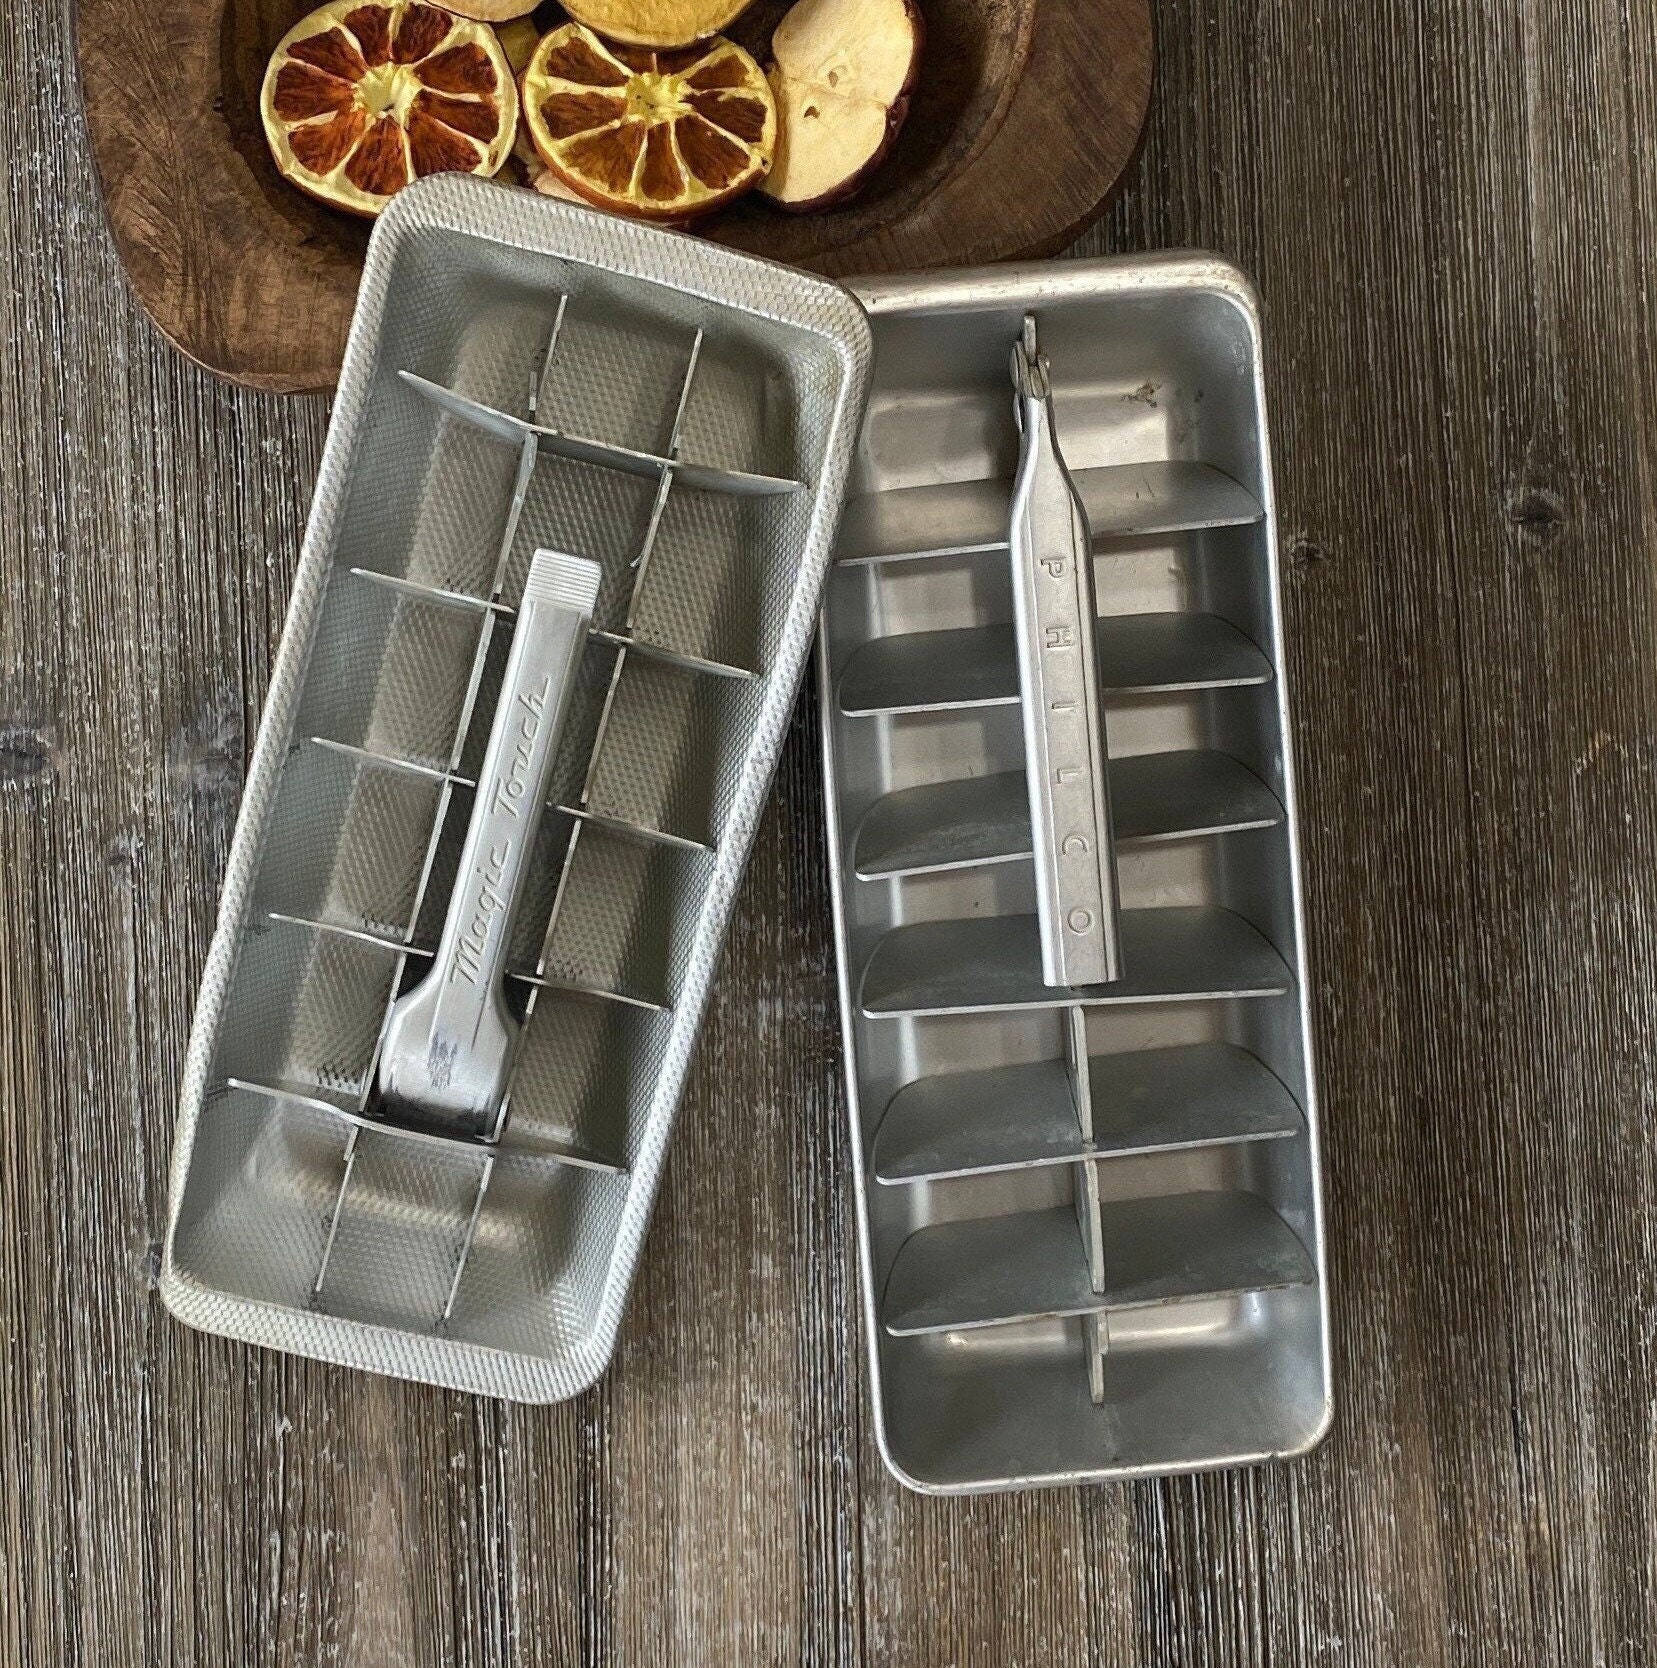 METAL ICE CUBE Trays Pick One Quickube Magic Touch Chipper 